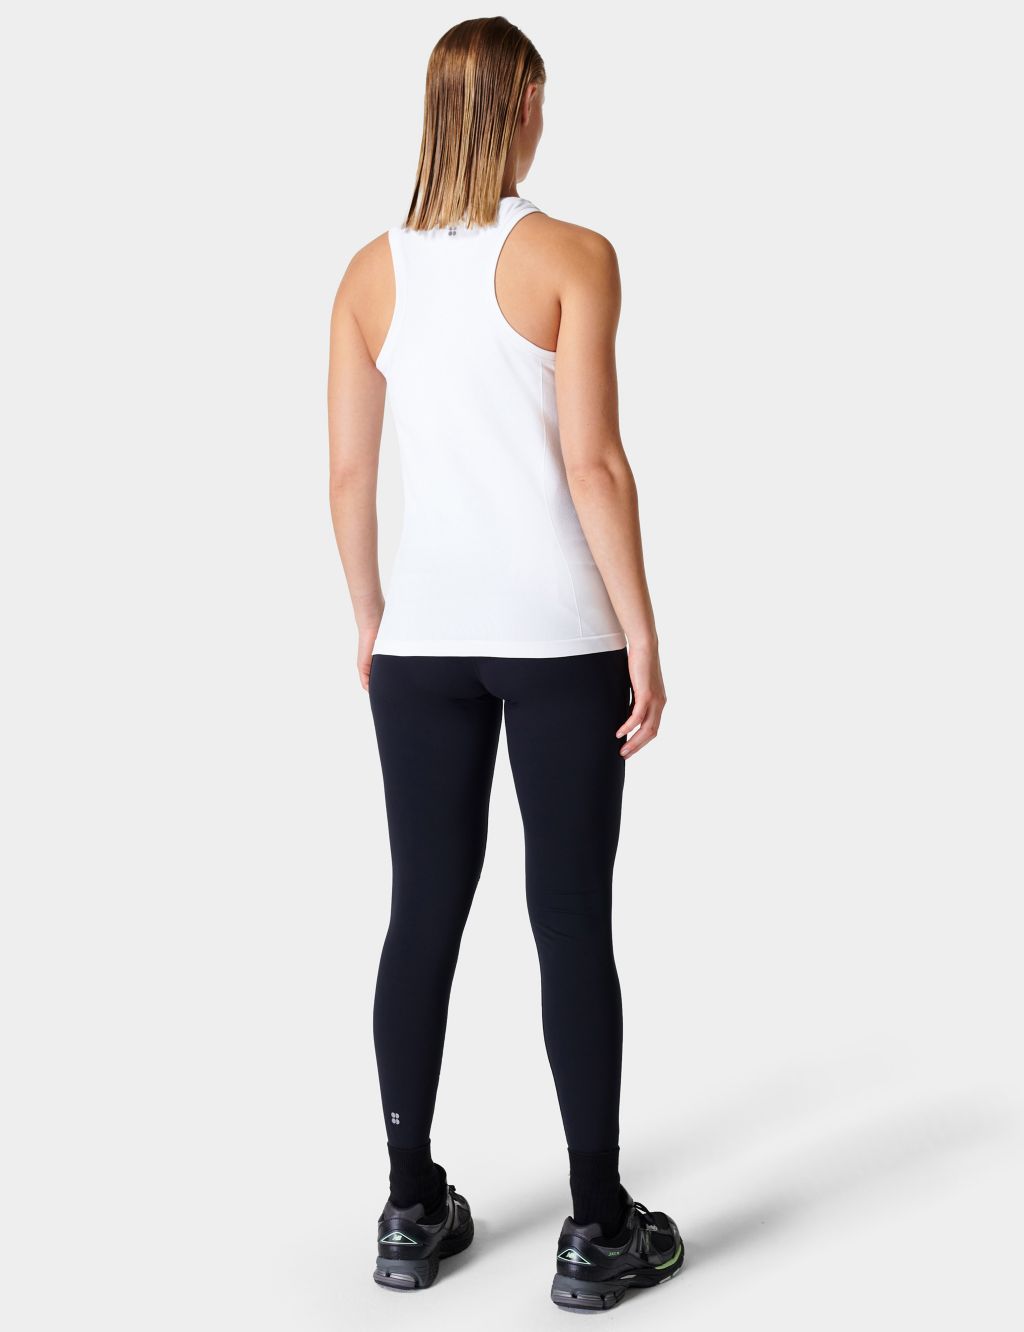 Athlete Seamless Fitted Vest Top image 4